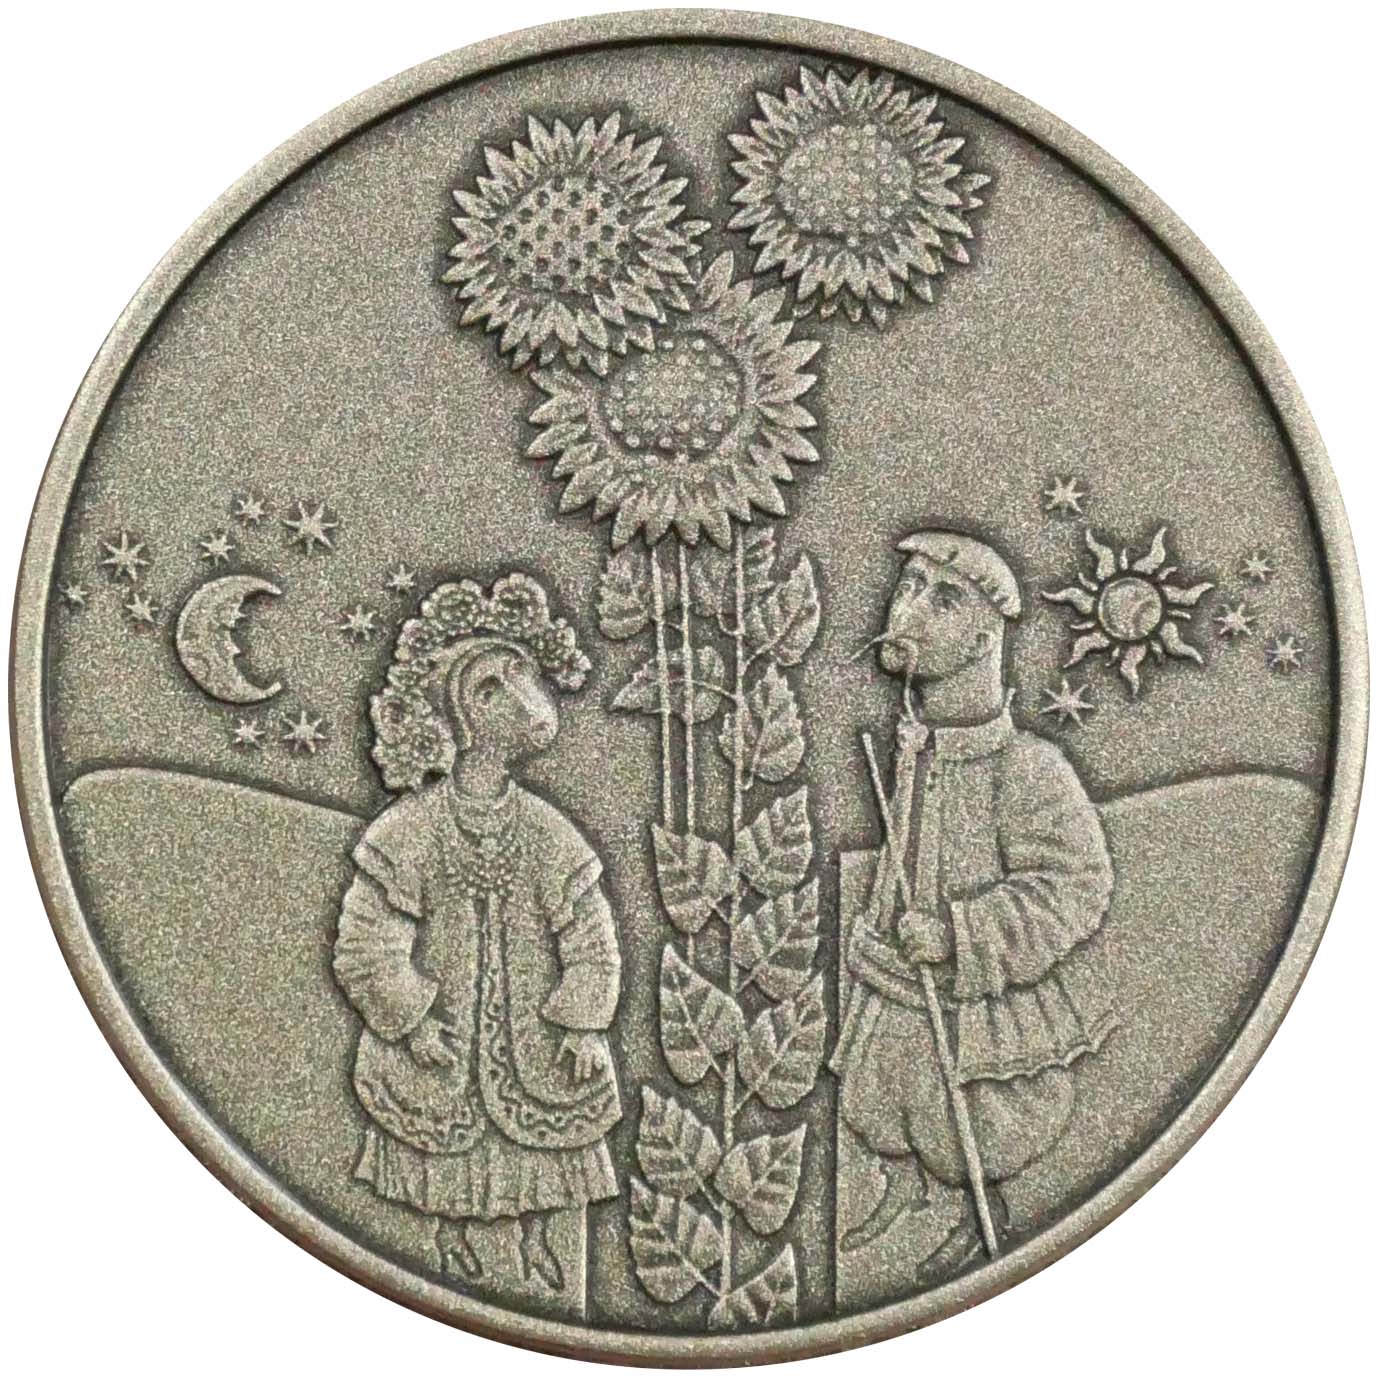 Image of International Coin Design Competition 2022 Most Excellent Work Silver Medal Obverse